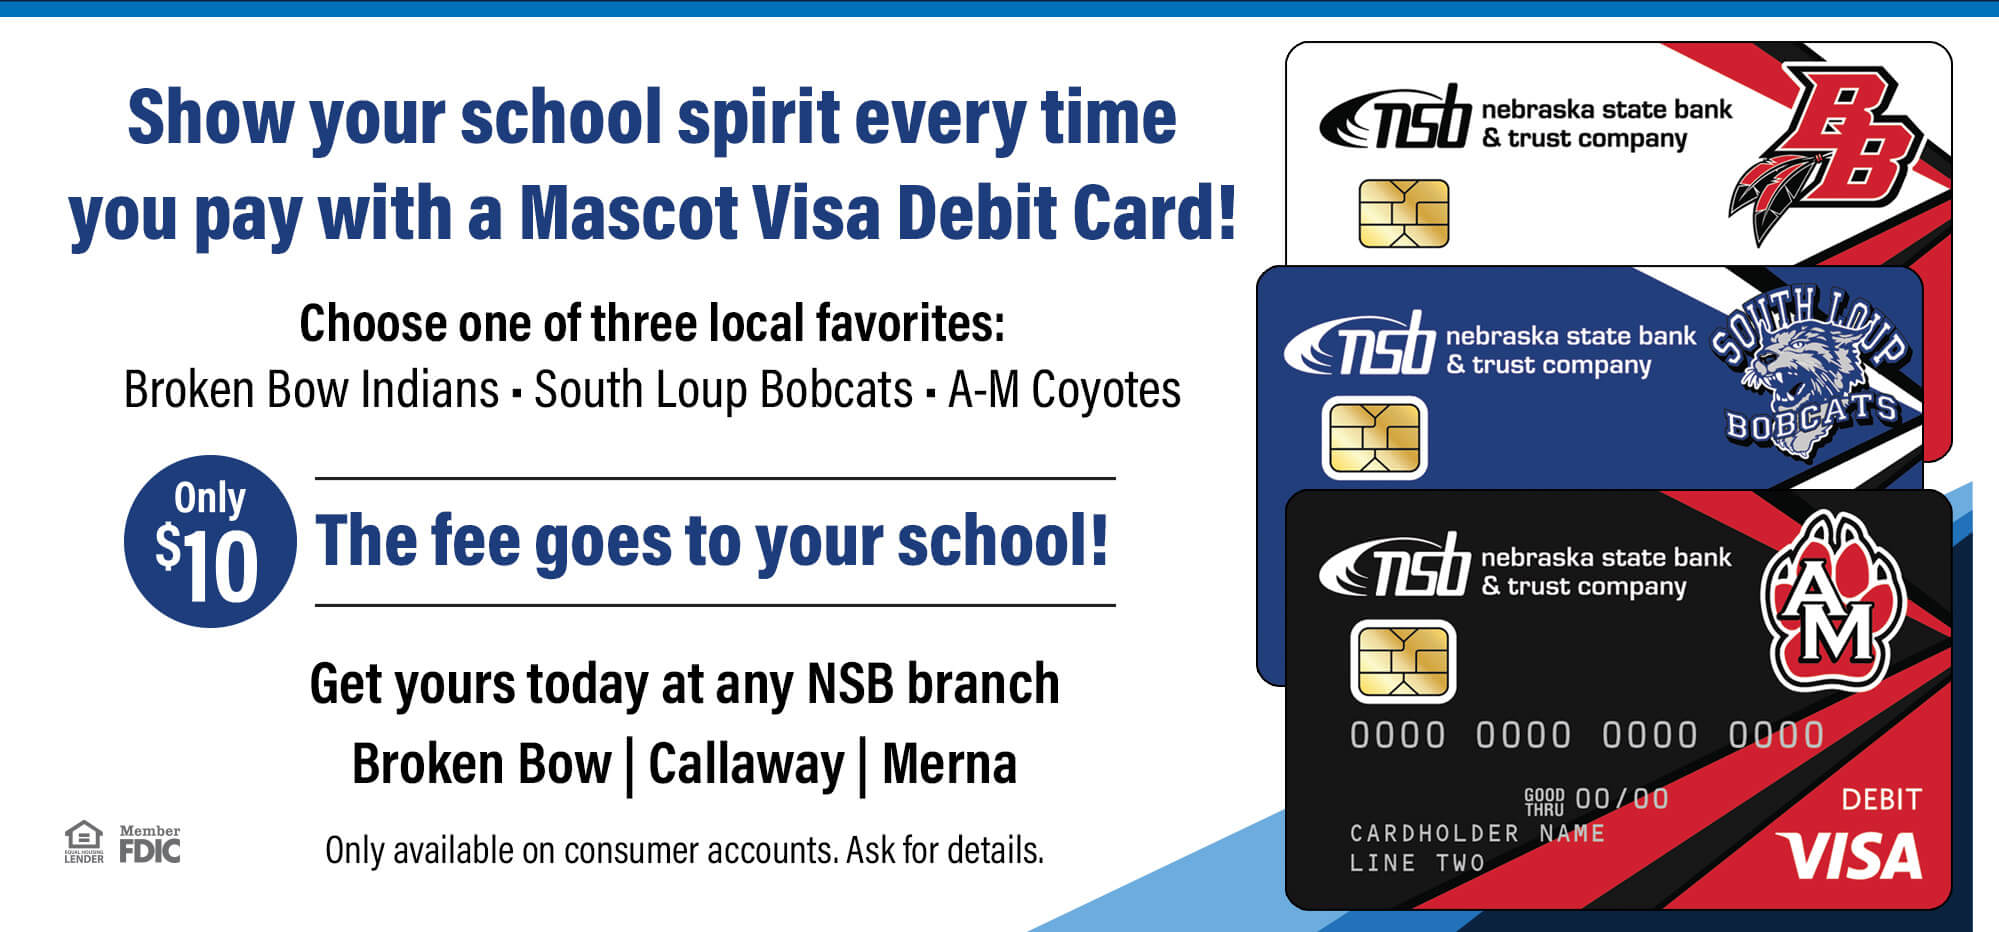 Show your school spirit every time you pay with a Mascot Visa Debit Card!